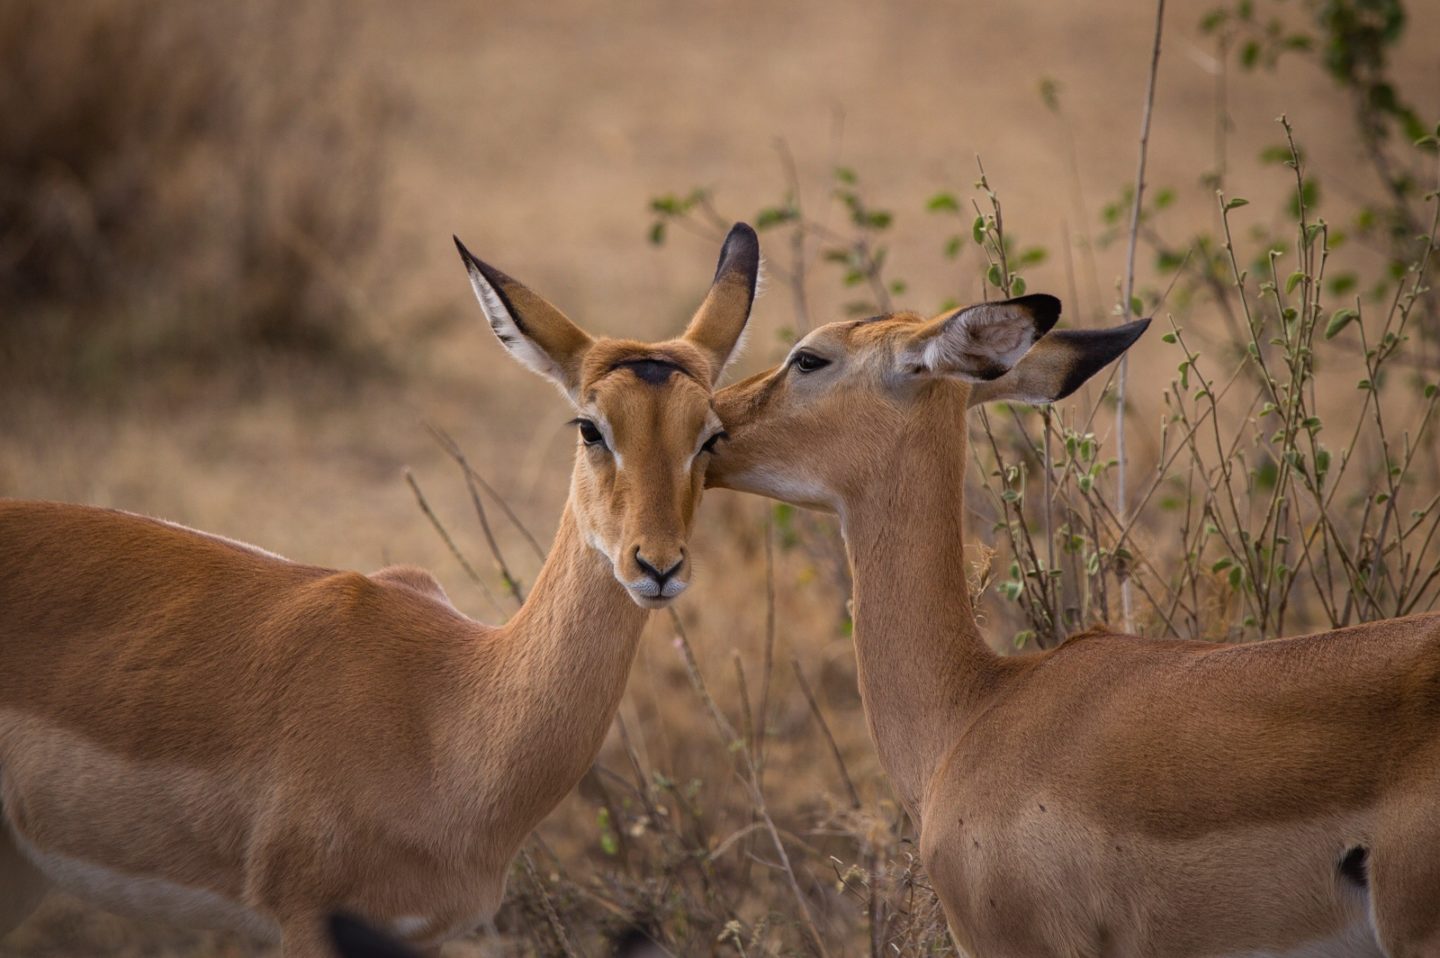 Female impalas giving each other a bath in the Serengeti.